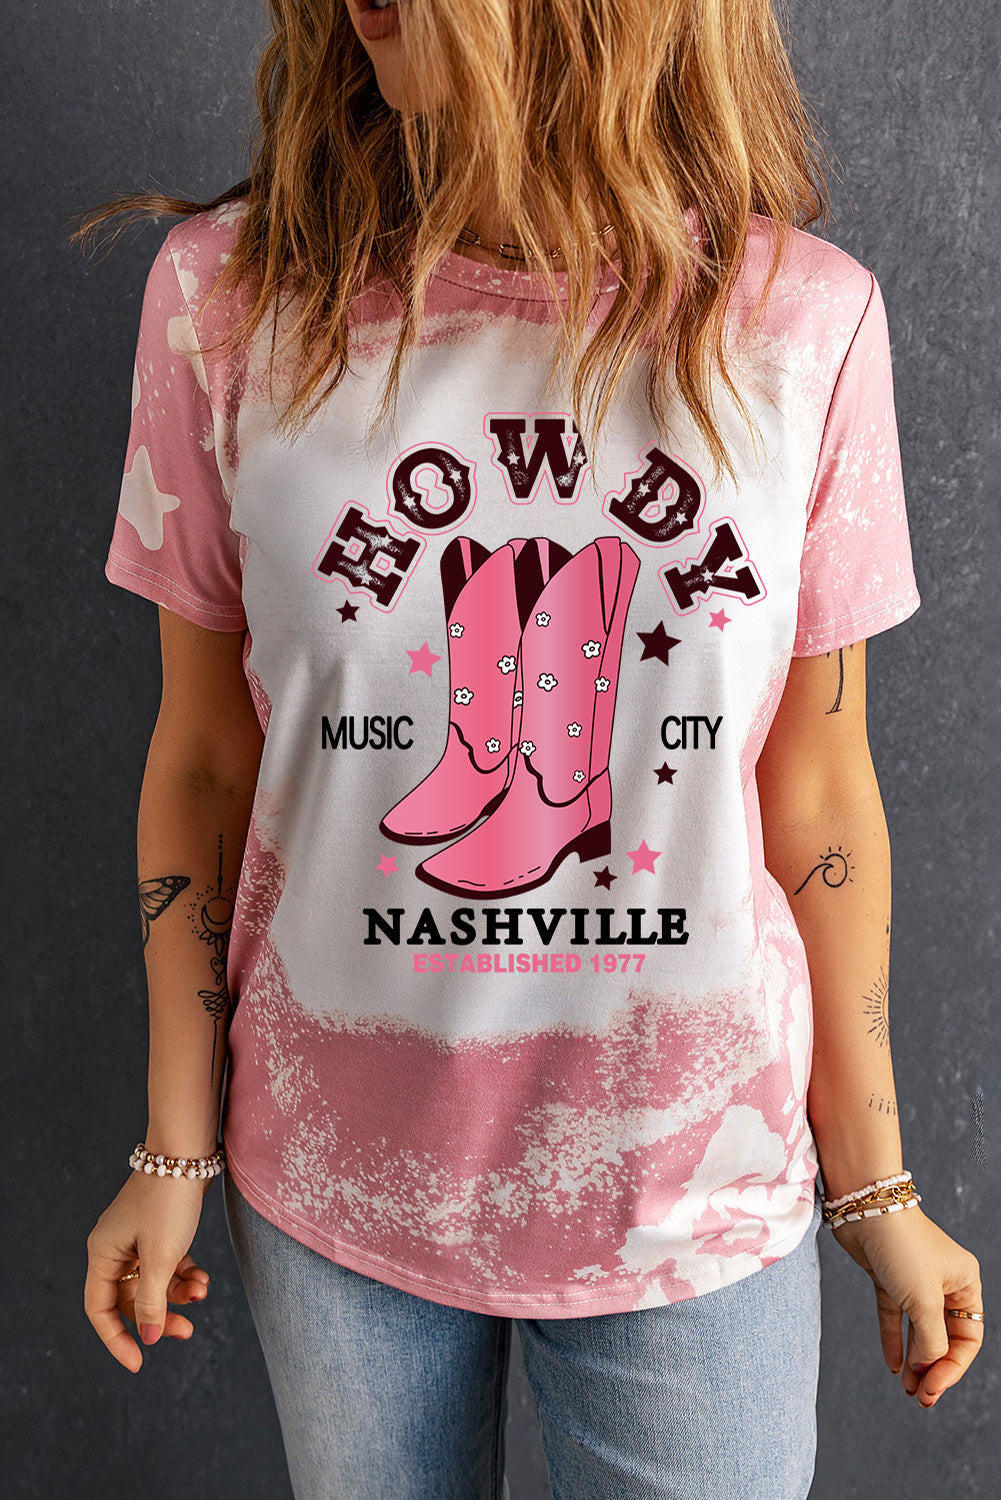 Cowboy Boots Graphic Short Sleeve Tee- ONLINE ONLY- 2-7 DAY SHIPPING